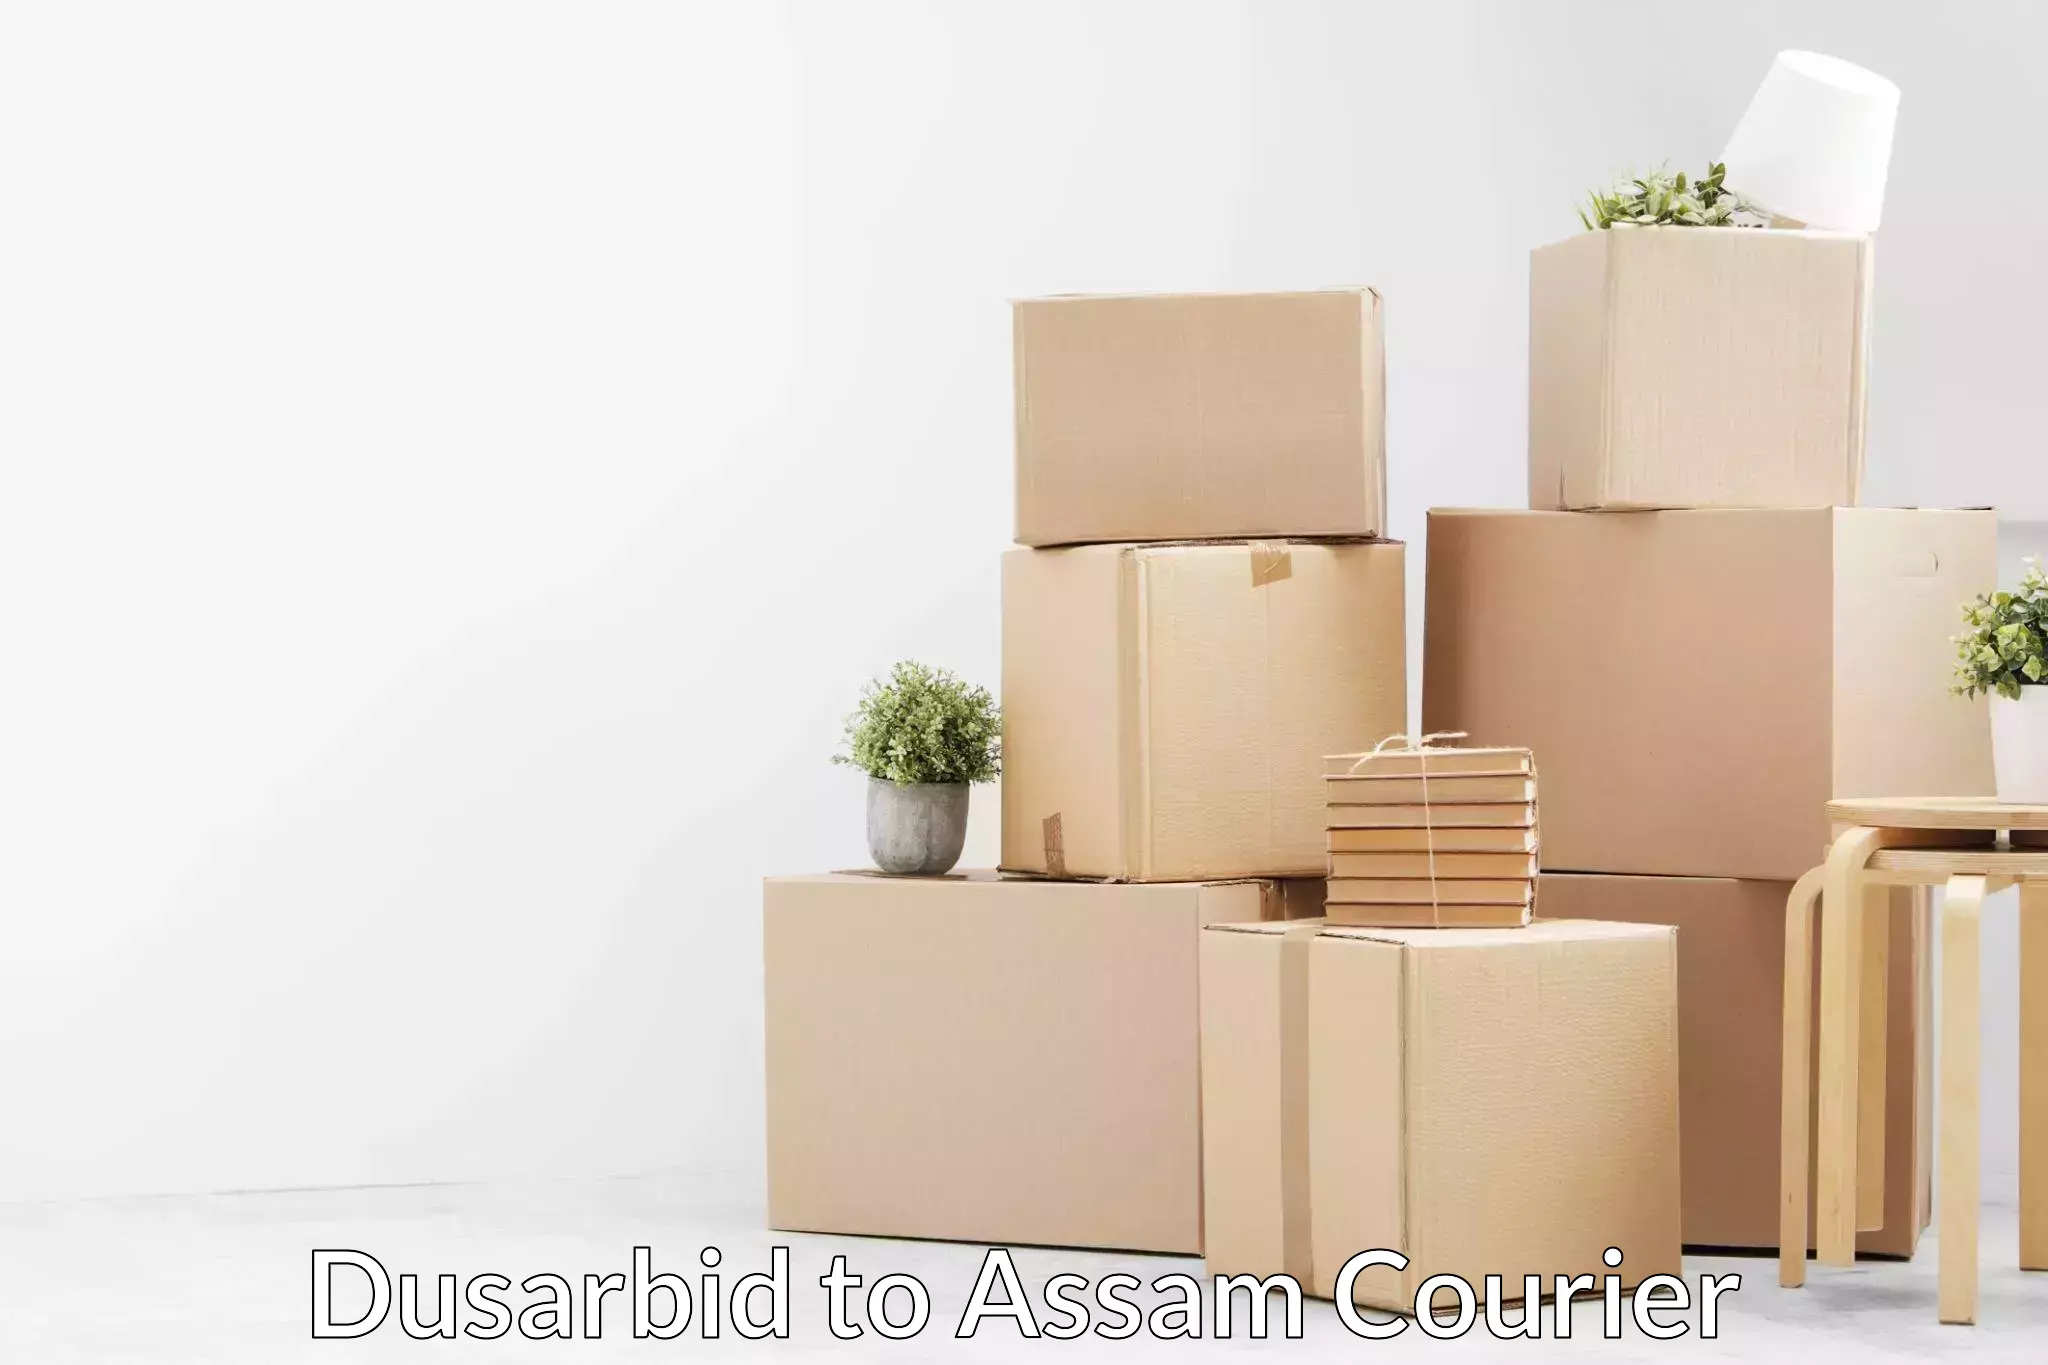 Professional moving assistance Dusarbid to Assam